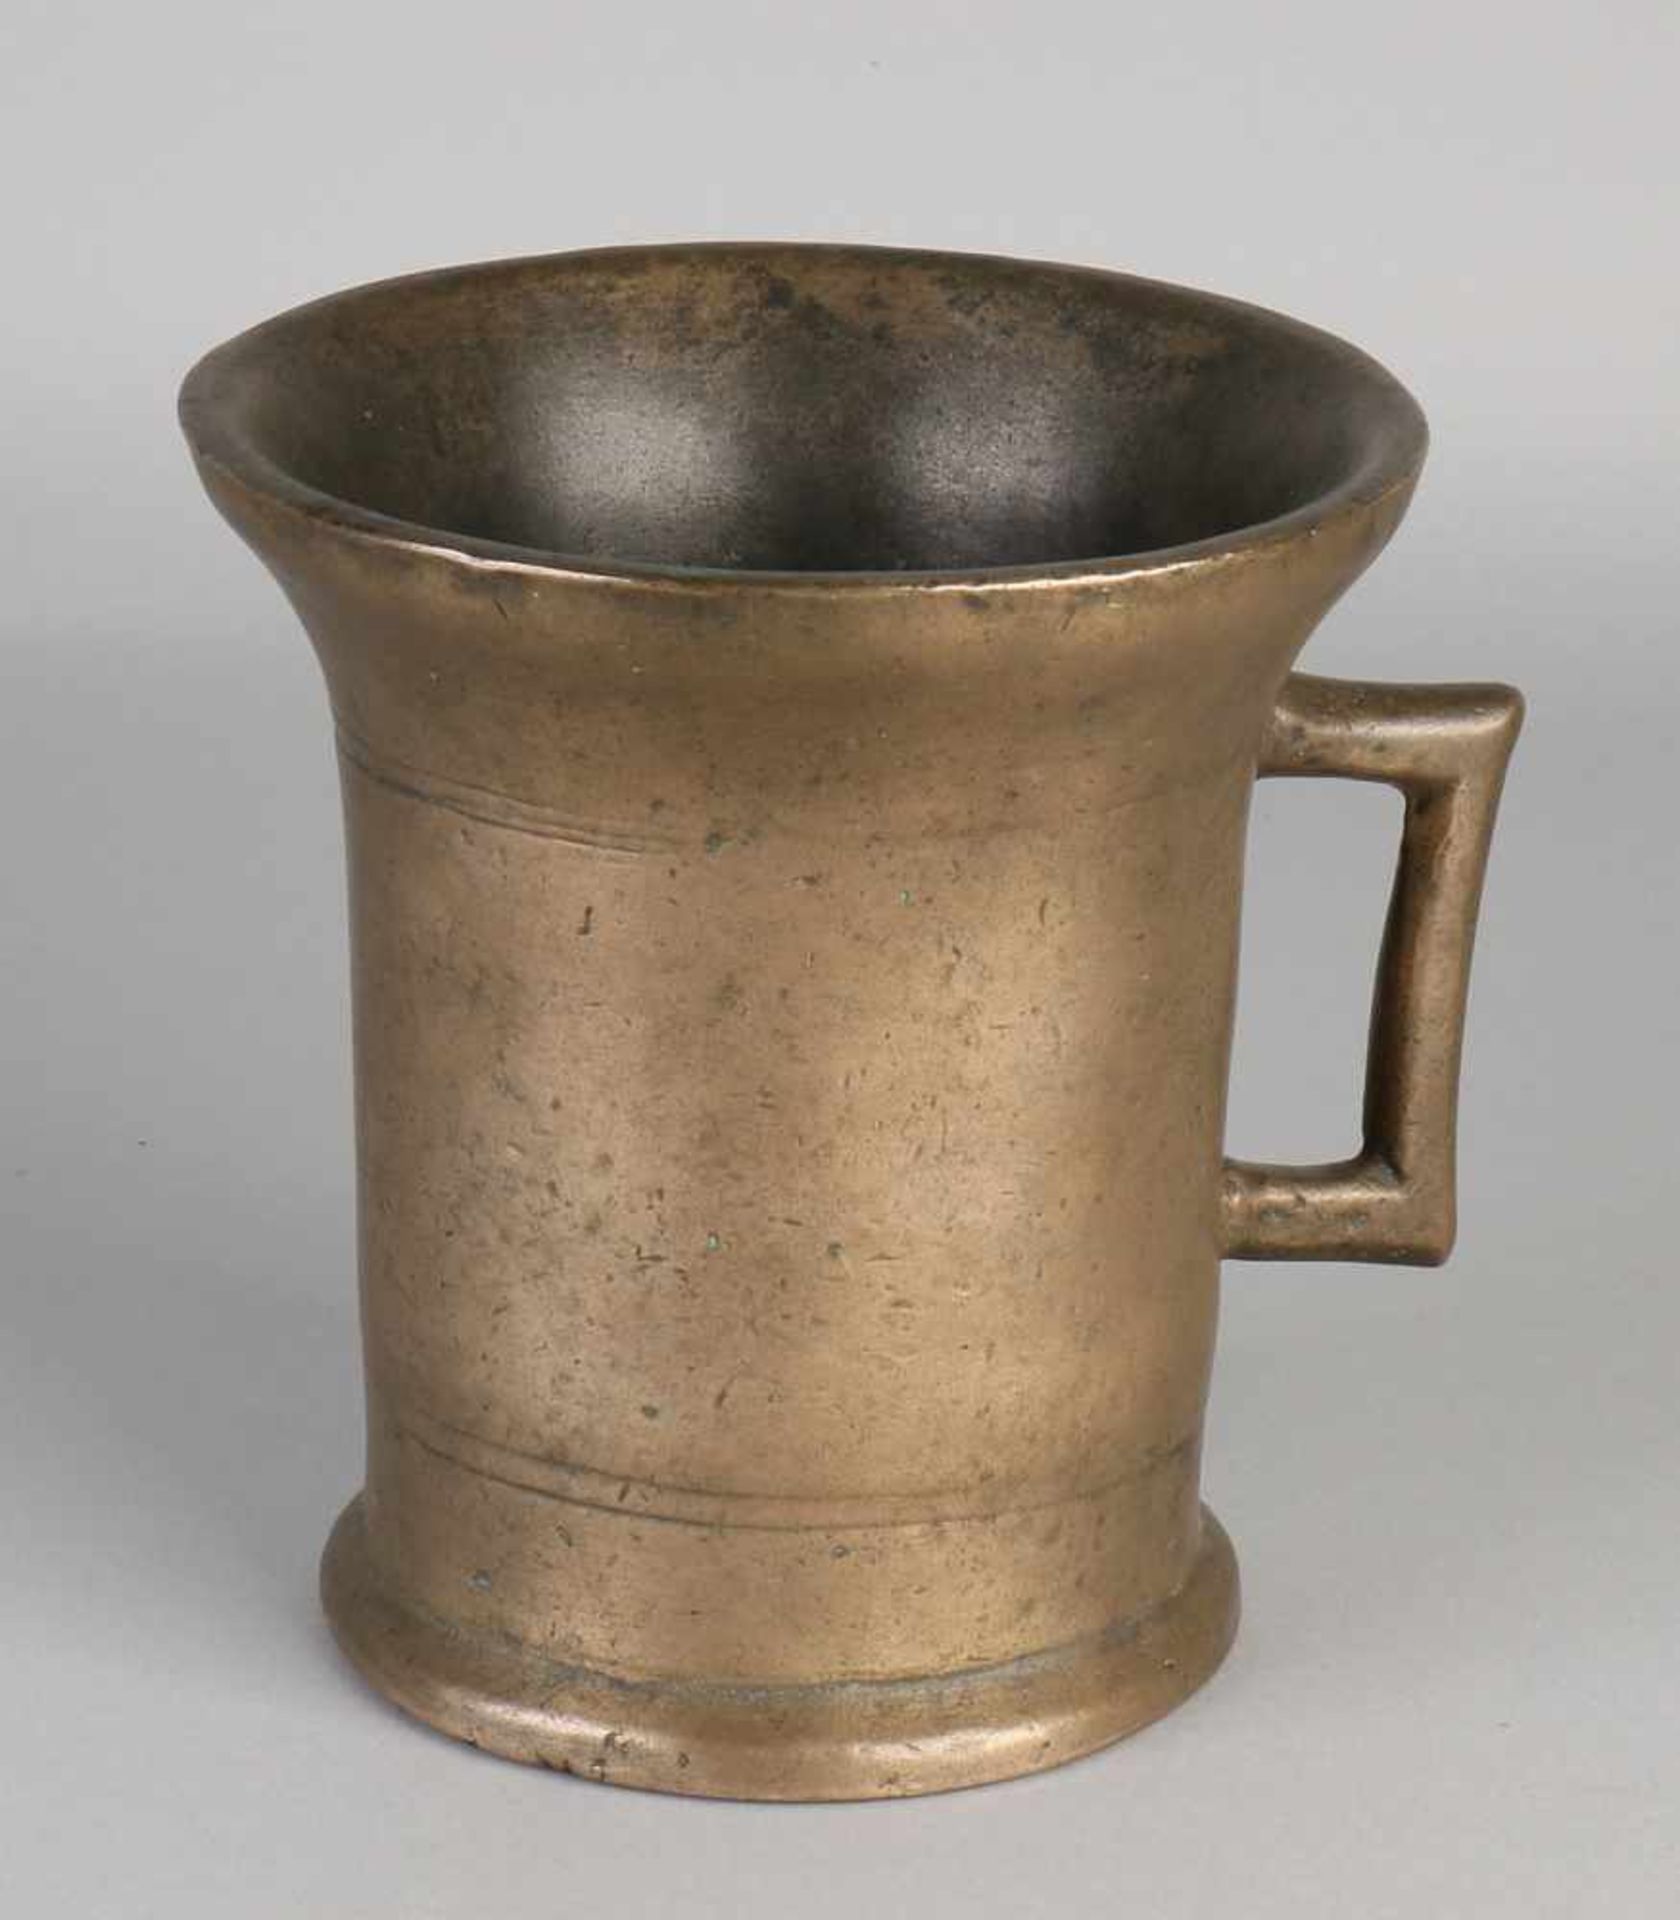 Large 18th century bronze mortar. Size: 16 x 15 cm dia. In good condition.